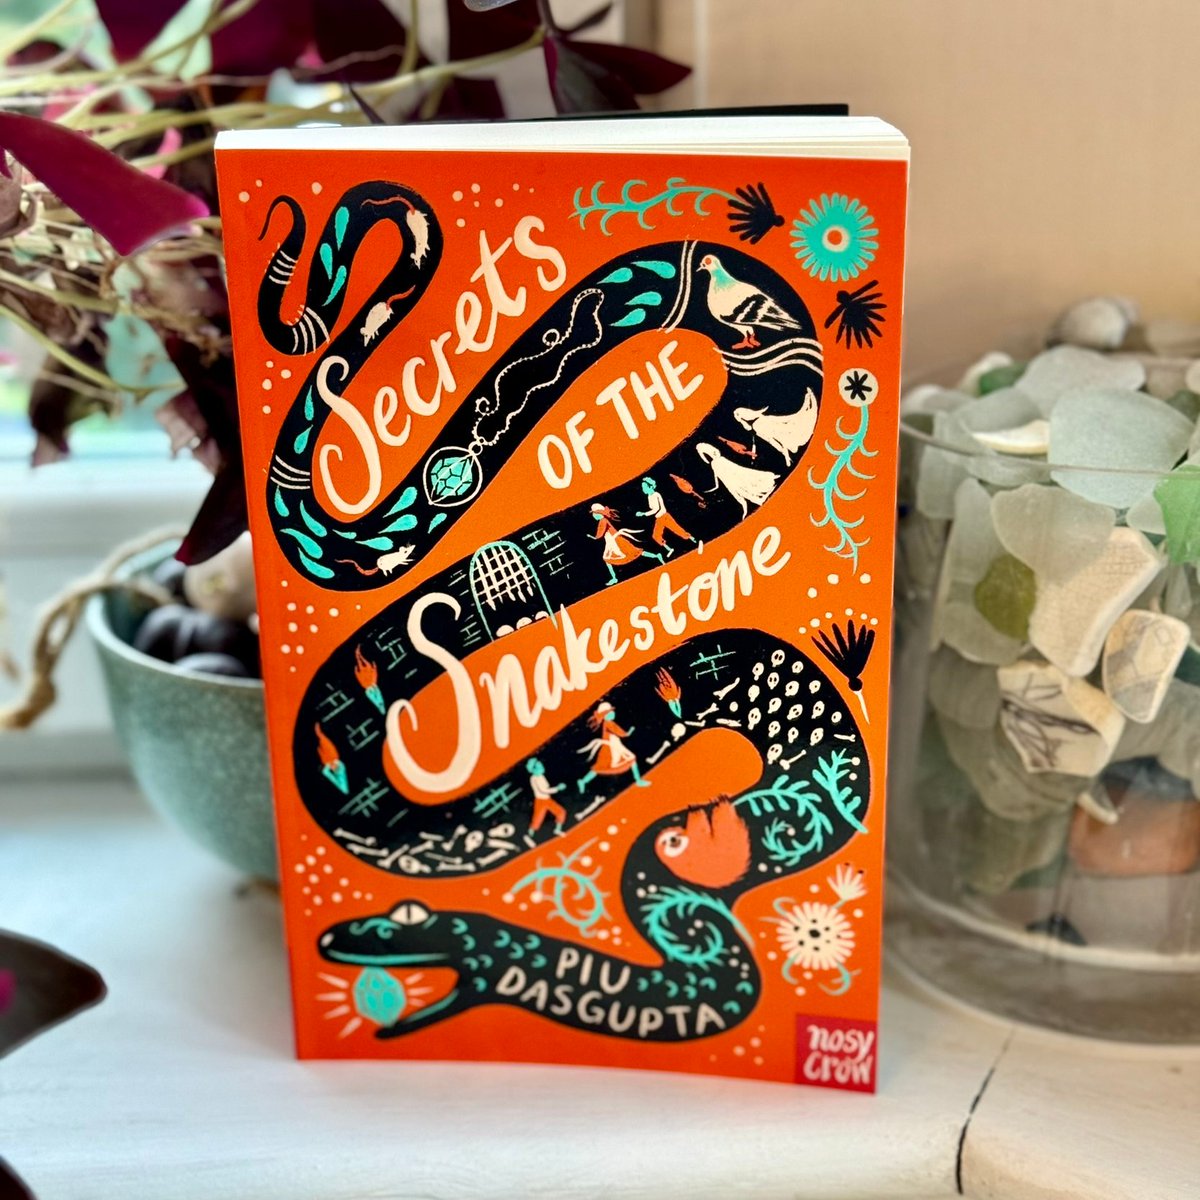 Just finished @PiuDasGupta1's #SecretsOfTheSnakestone and it was a blast! 19th century Paris, sinister secret societies, danger and betrayal, a fearless heroine and a rattling pace. Great stuff! 🐀🐍💎 @NosyCrow